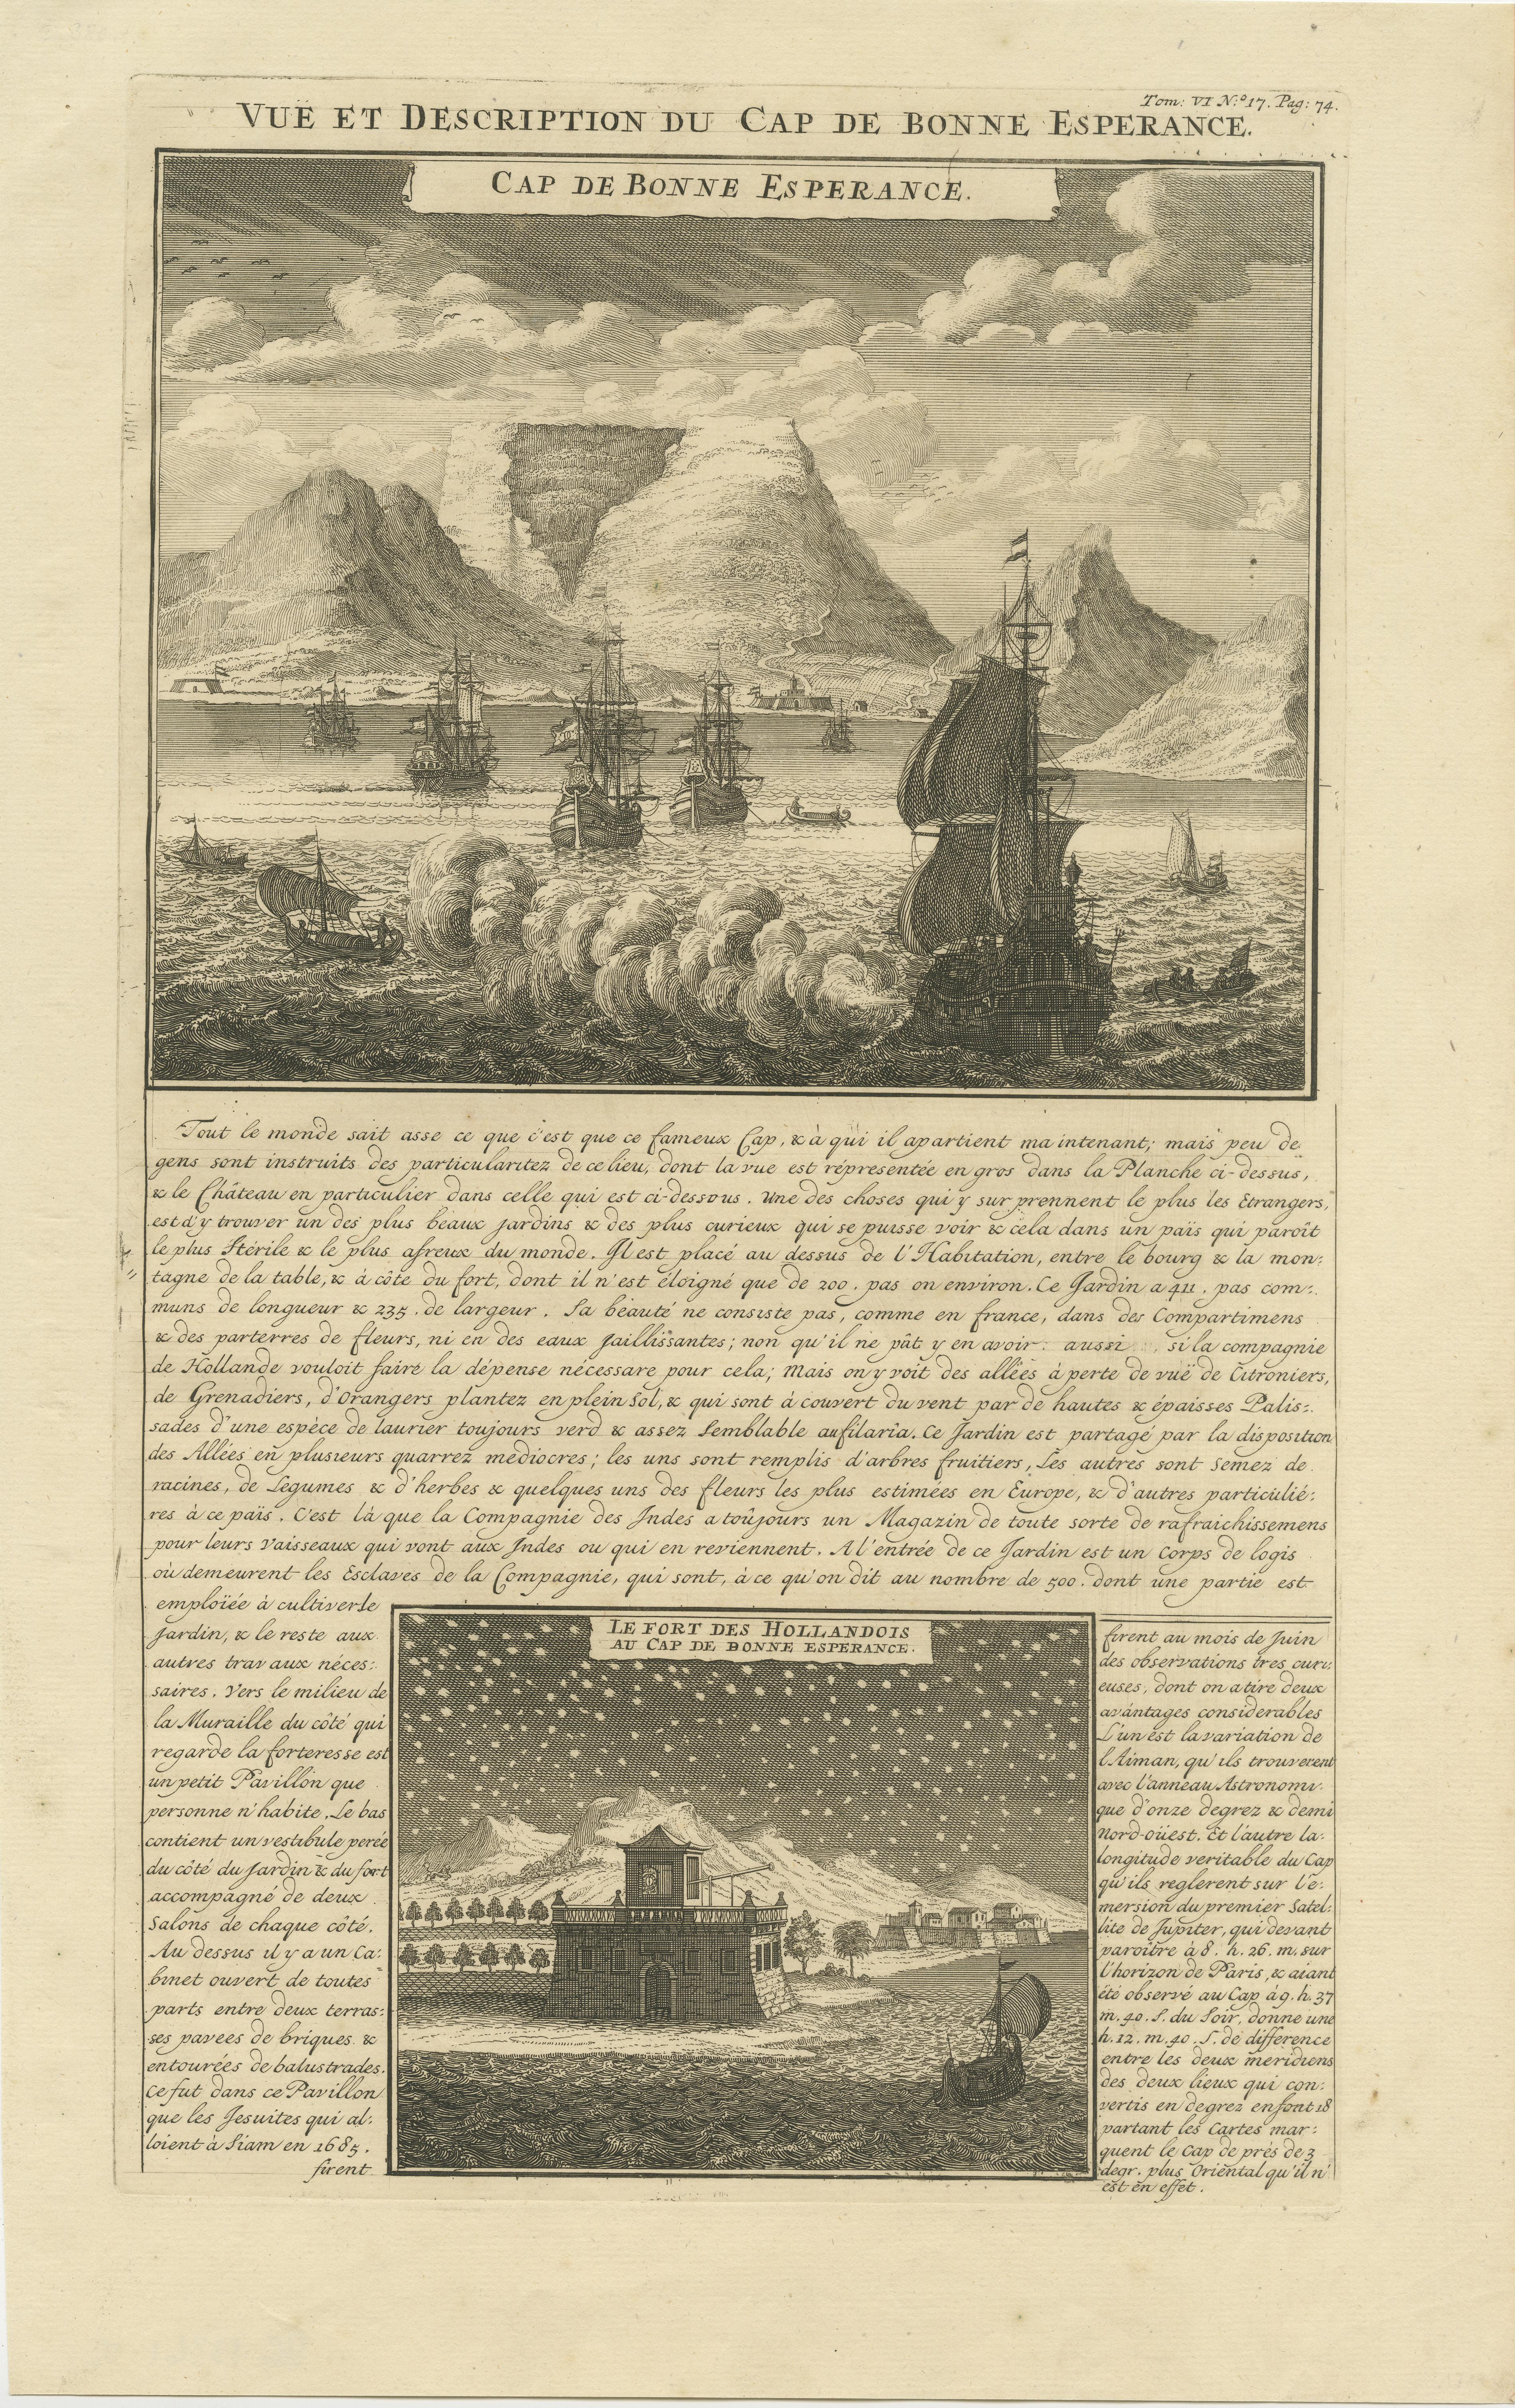 Antique print titled 'Vue et Description du Cap de Bonne Esperance'. Striking view of the Cape of Good Hope, with Dutch ships in the harbor and Table Mountain in the background. A night view of the Dutch Fort at the Cape is shown below. Originates